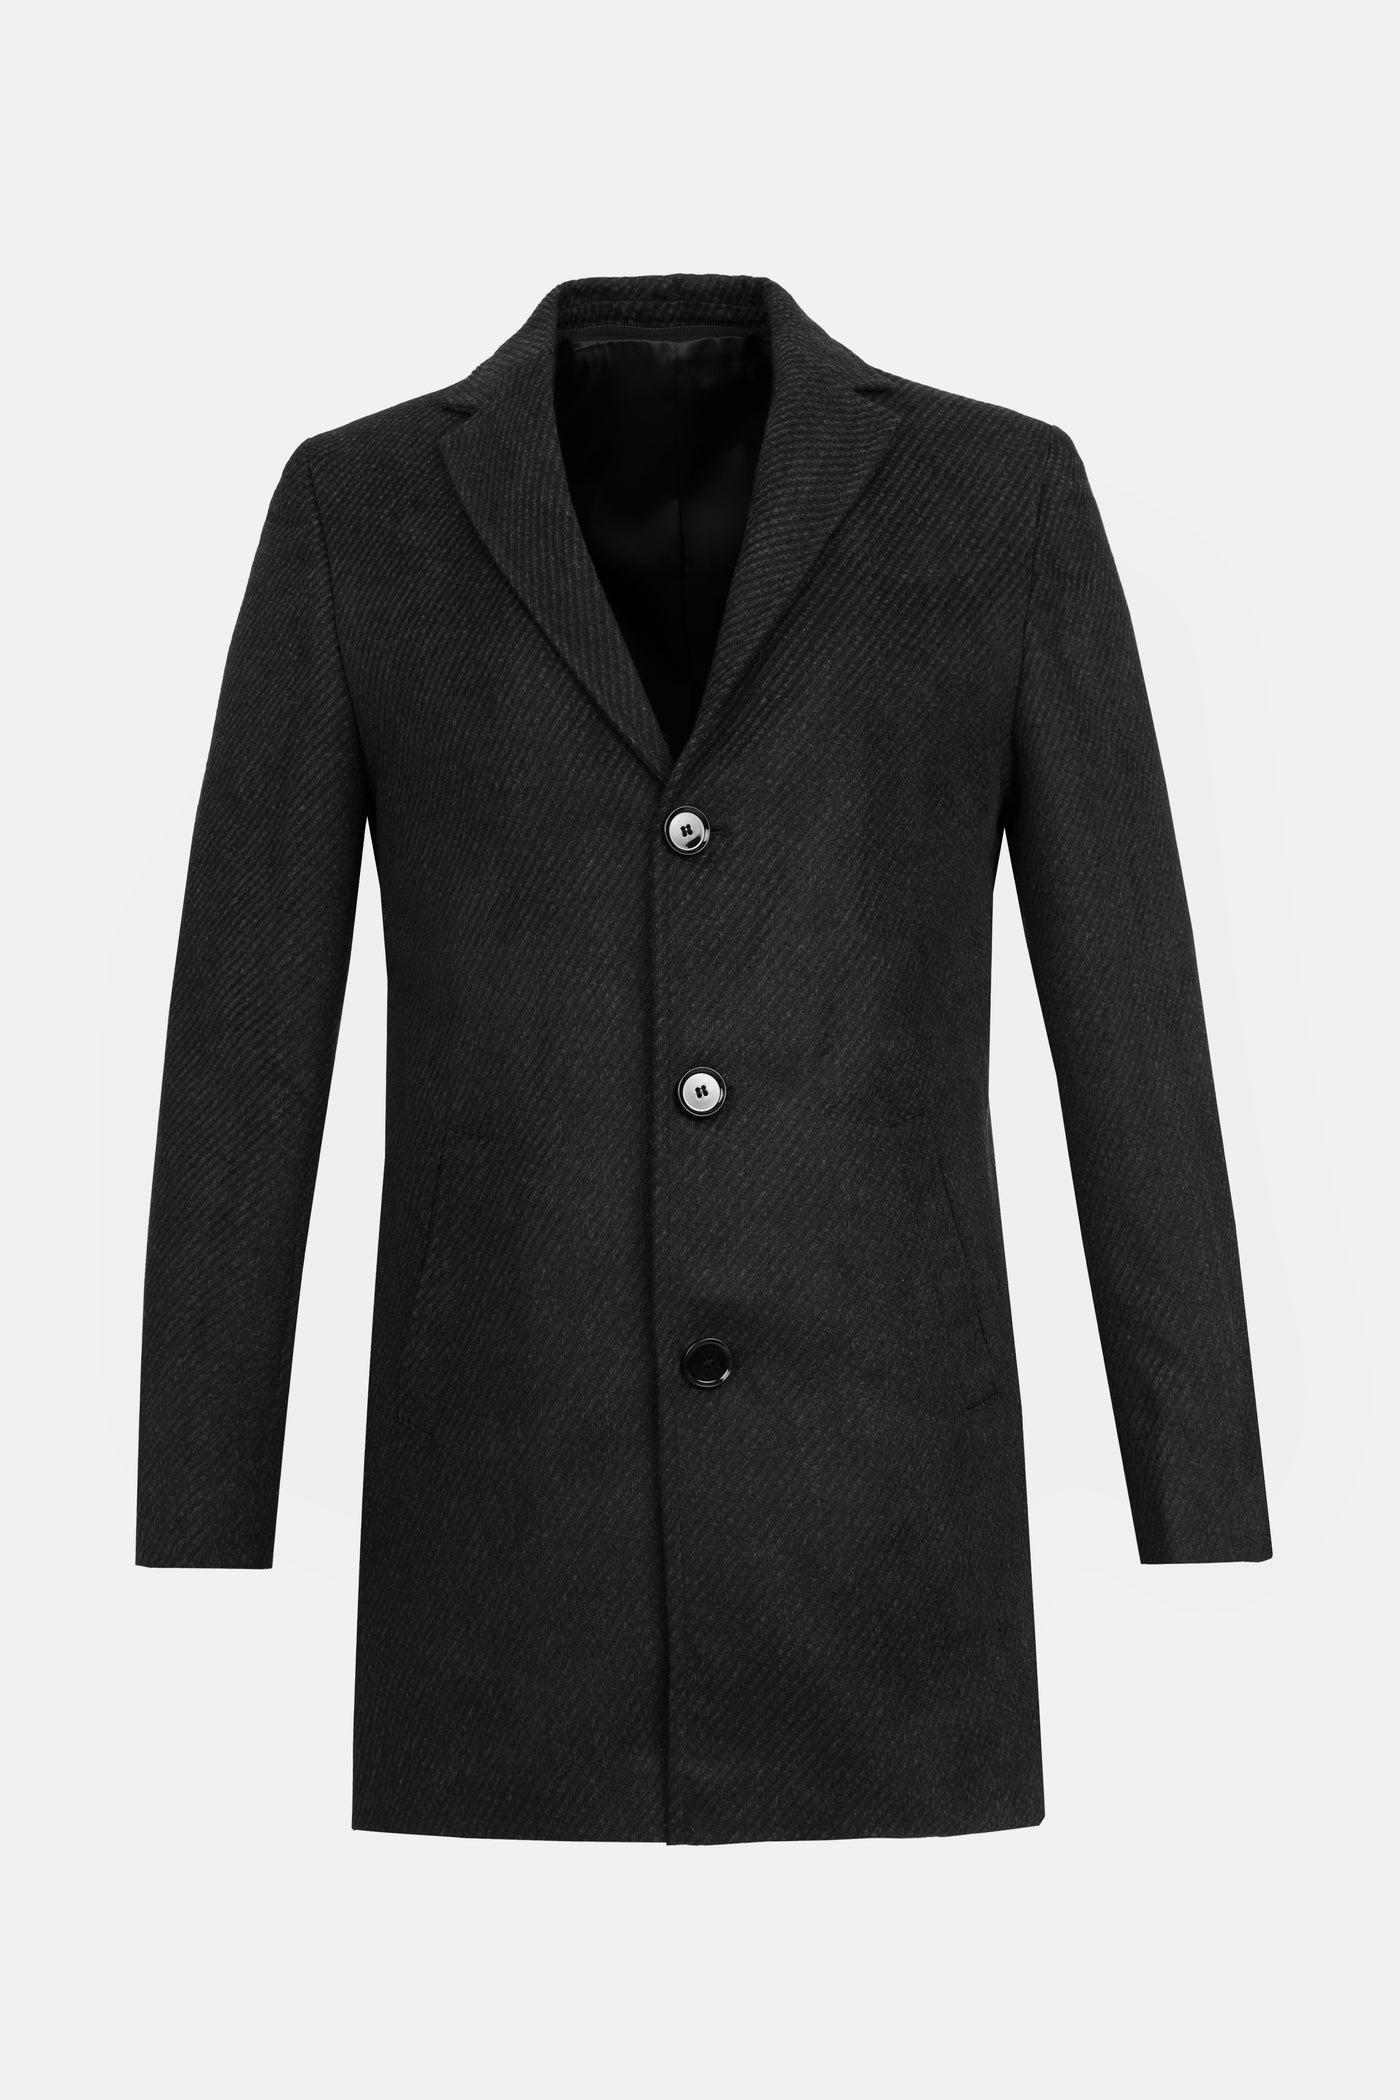 Jacquard Dark Gray & Black Woven wide lapel Coat with removable padded piece